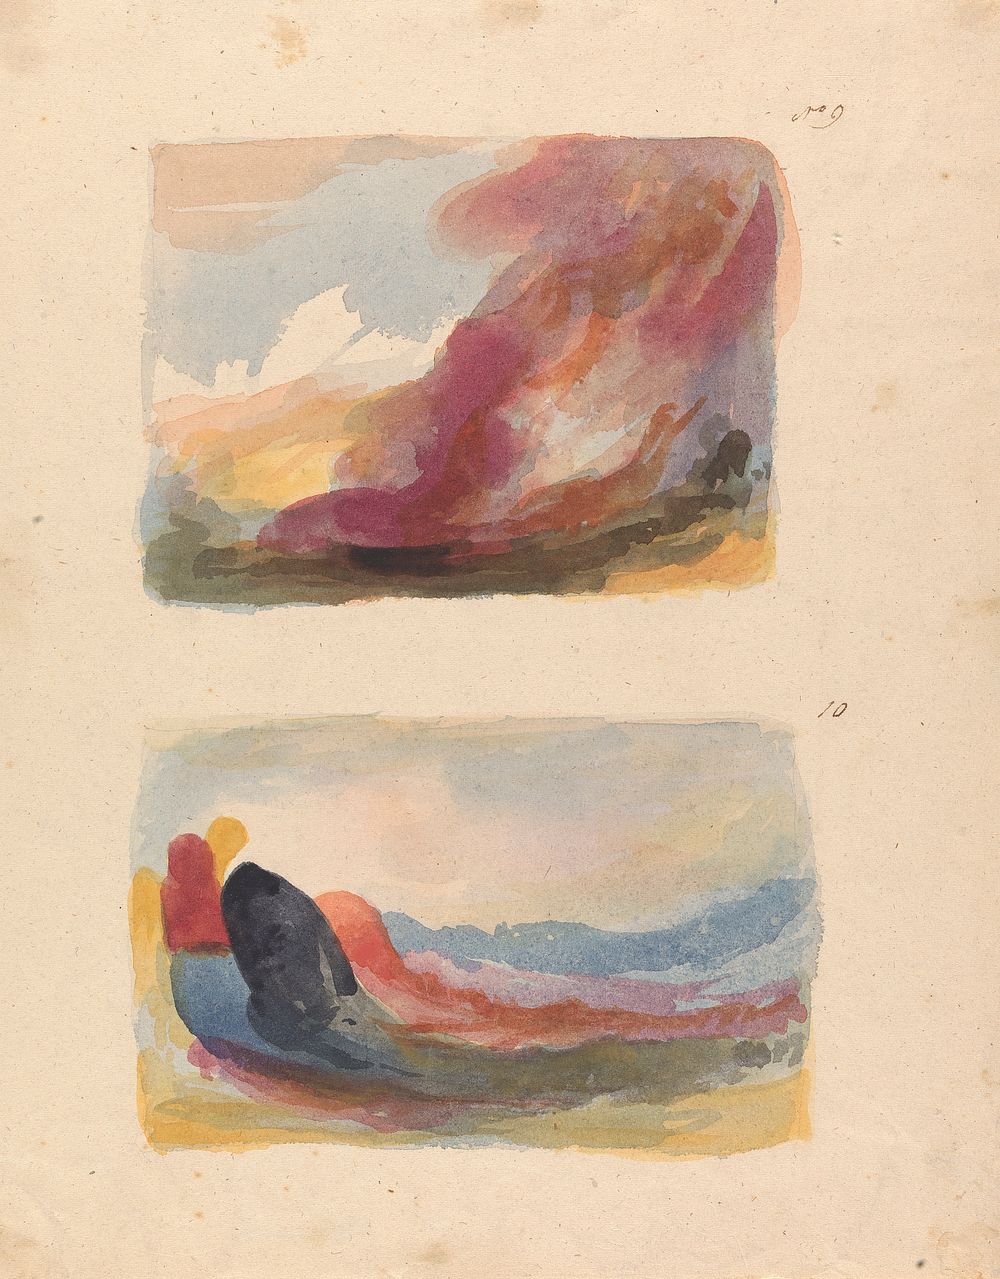 Two Drawings on One Sheet: Landscape - Color Wash, Titian (no. 9); Landscape - color wash, Rubens (no. 10)